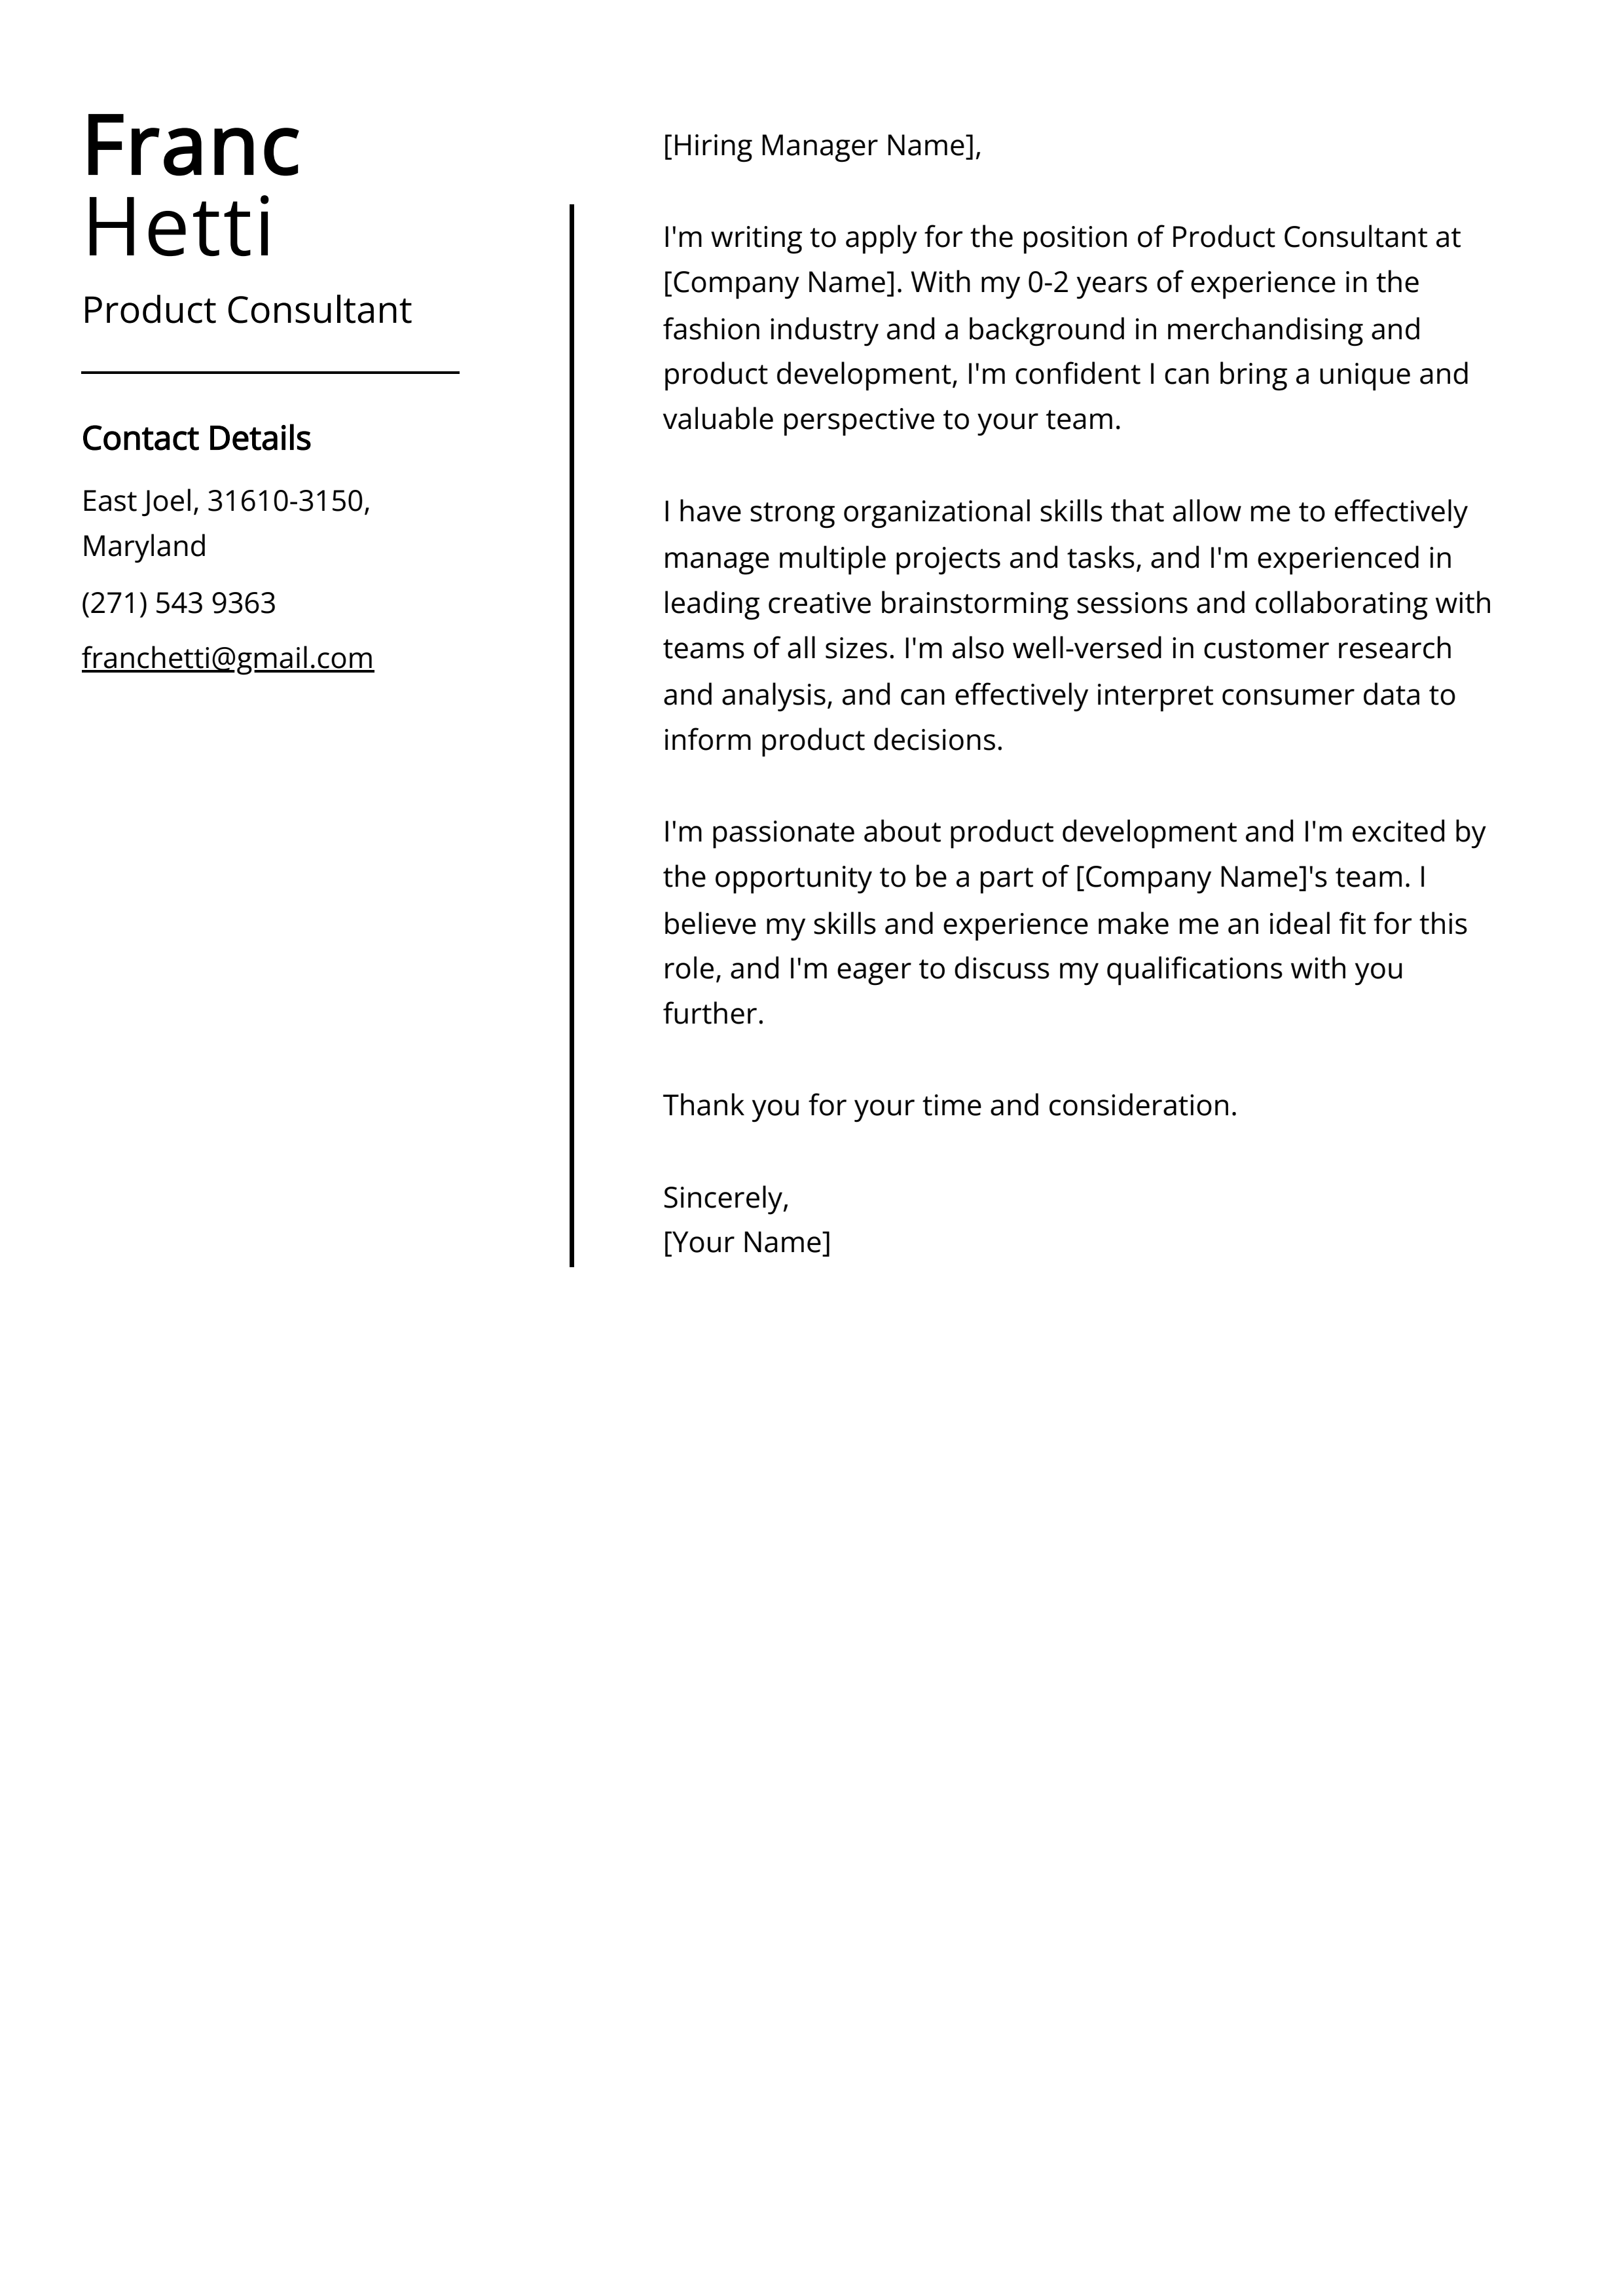 Product Consultant Cover Letter Example